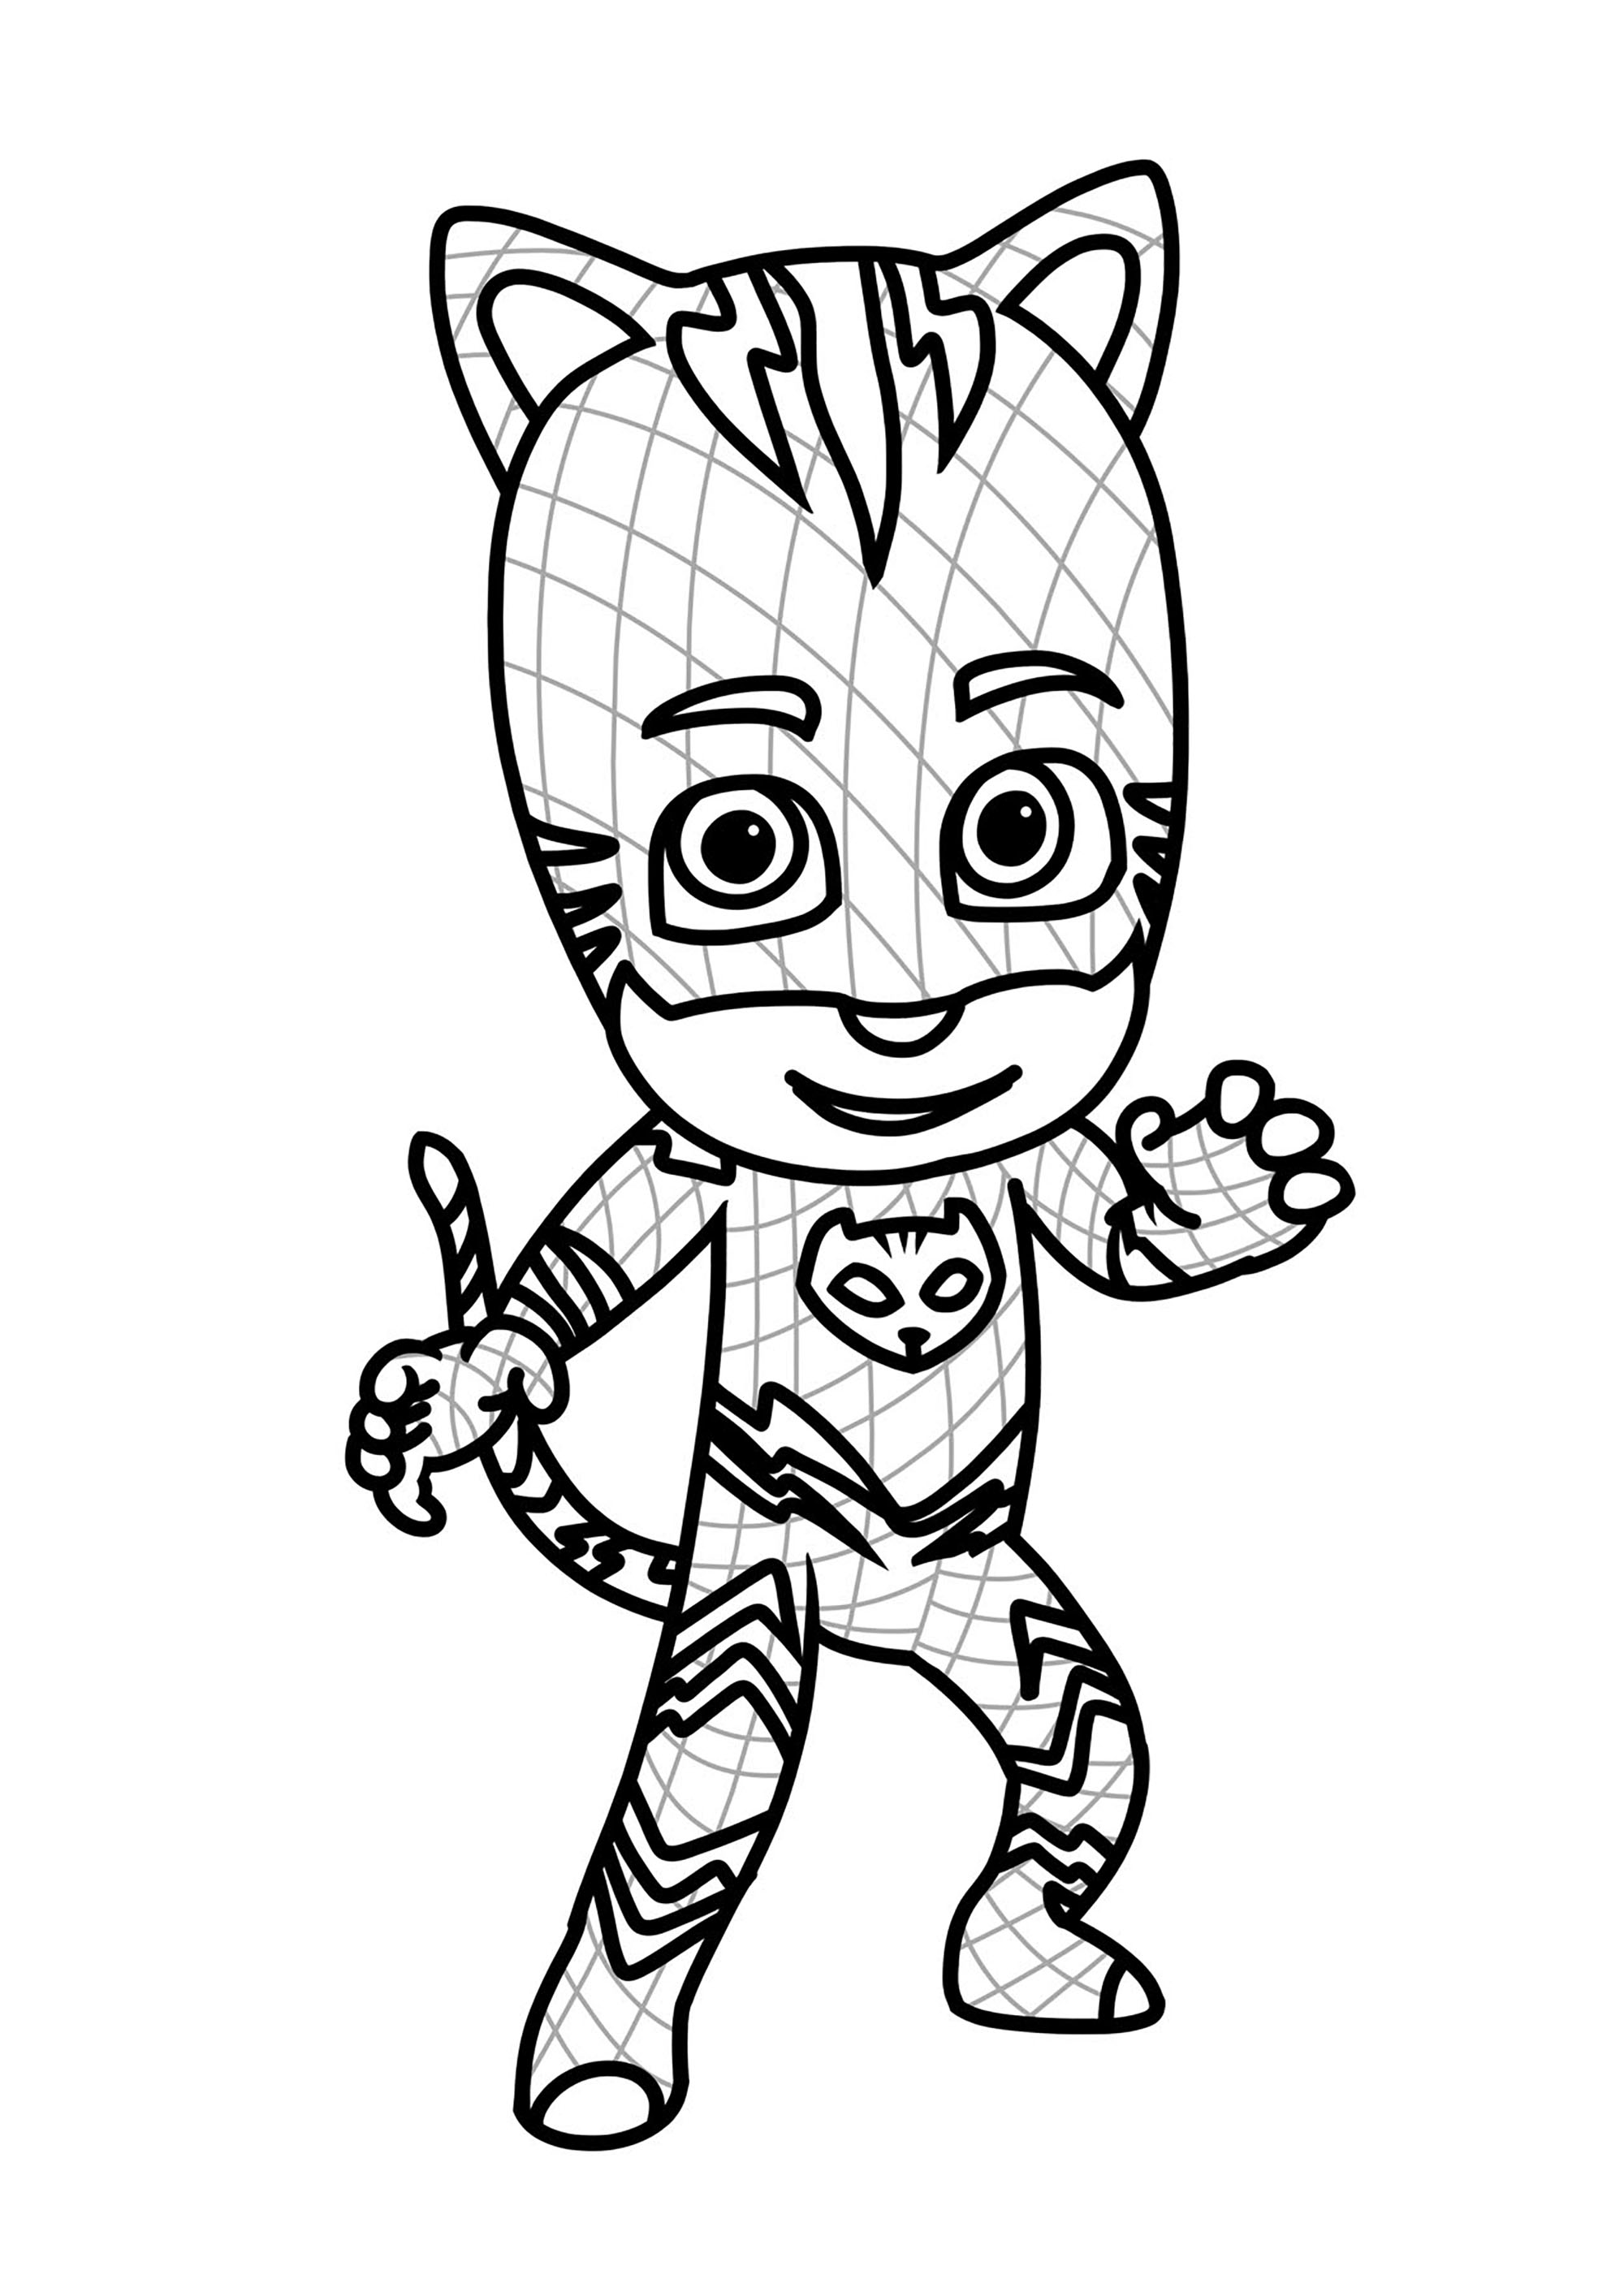 Catboy from PJ Masks Colored Pencils  Drawing Catboy from PJ Masks with  Color Pencils  DrawingTutorials101com